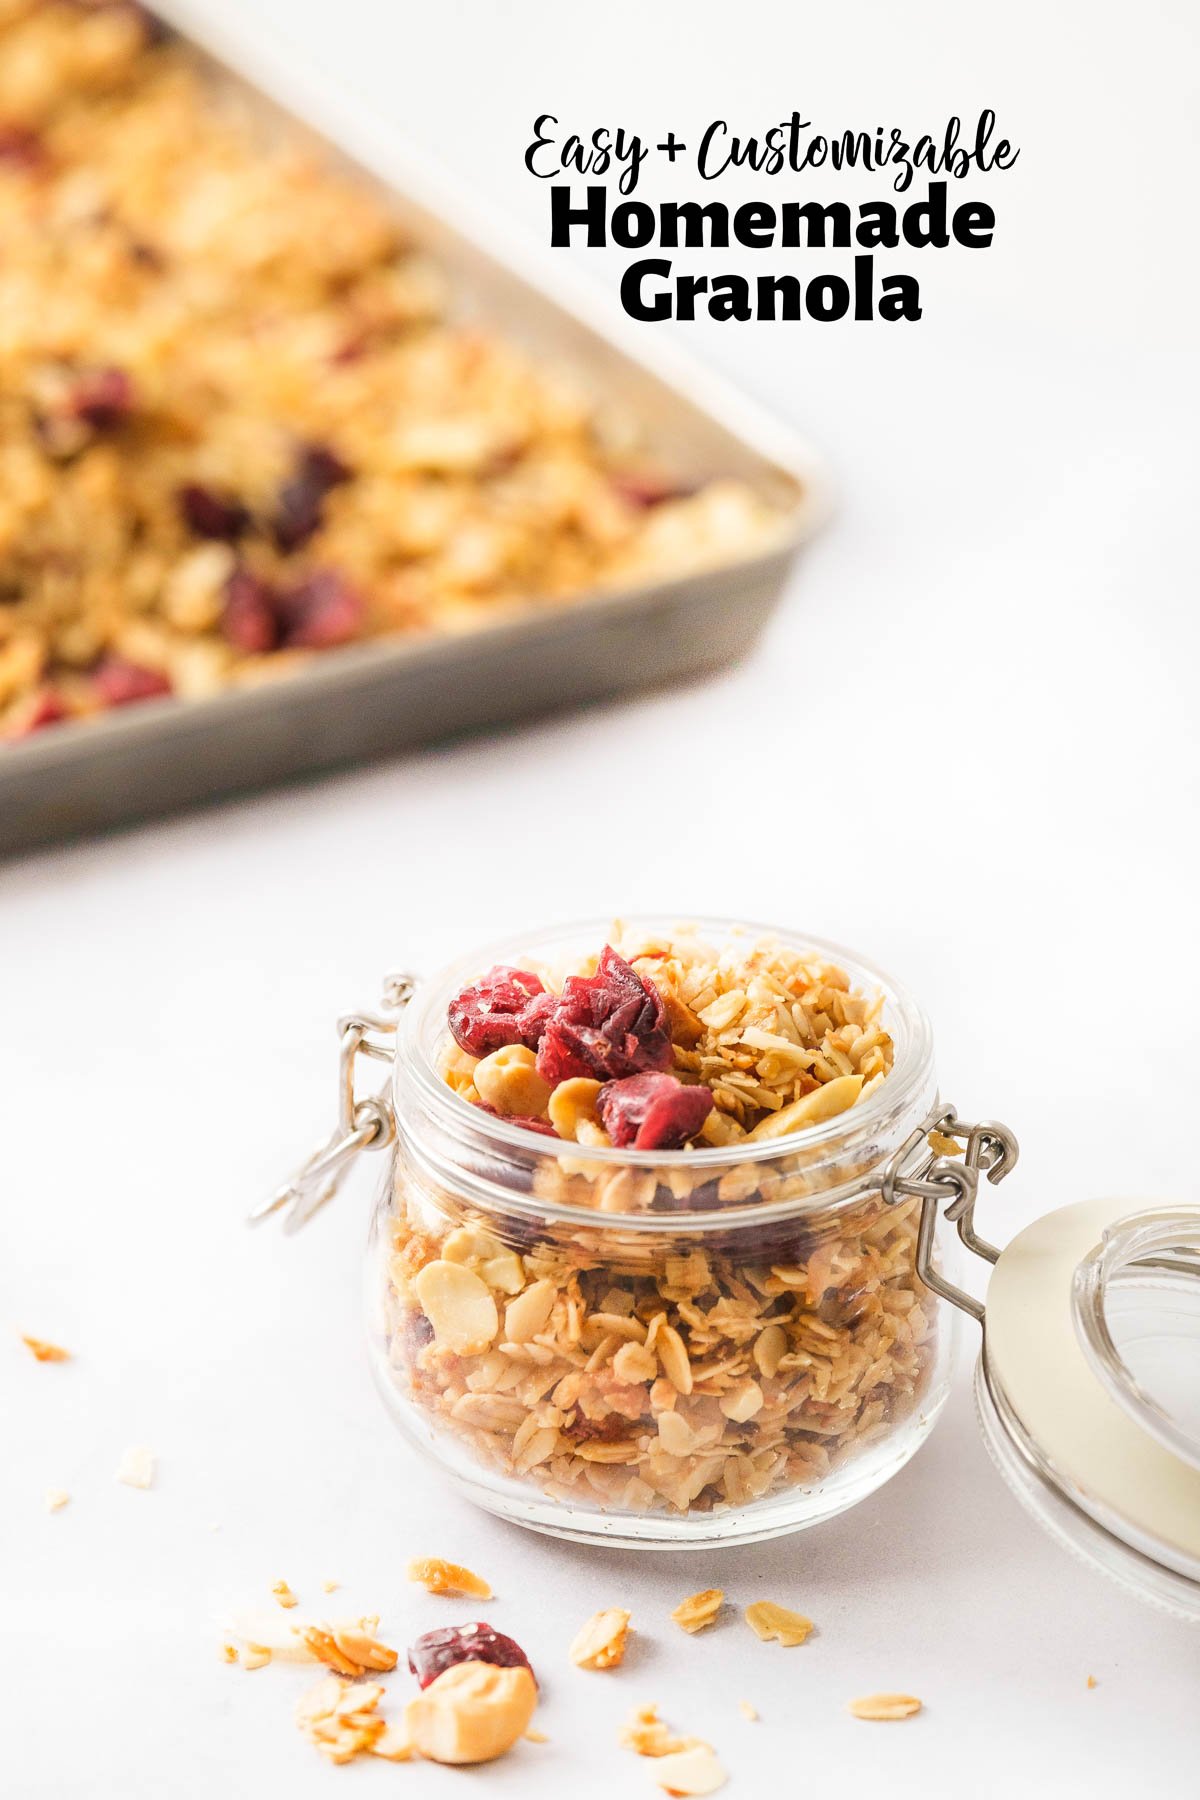 Homemade Granola with text overlay.